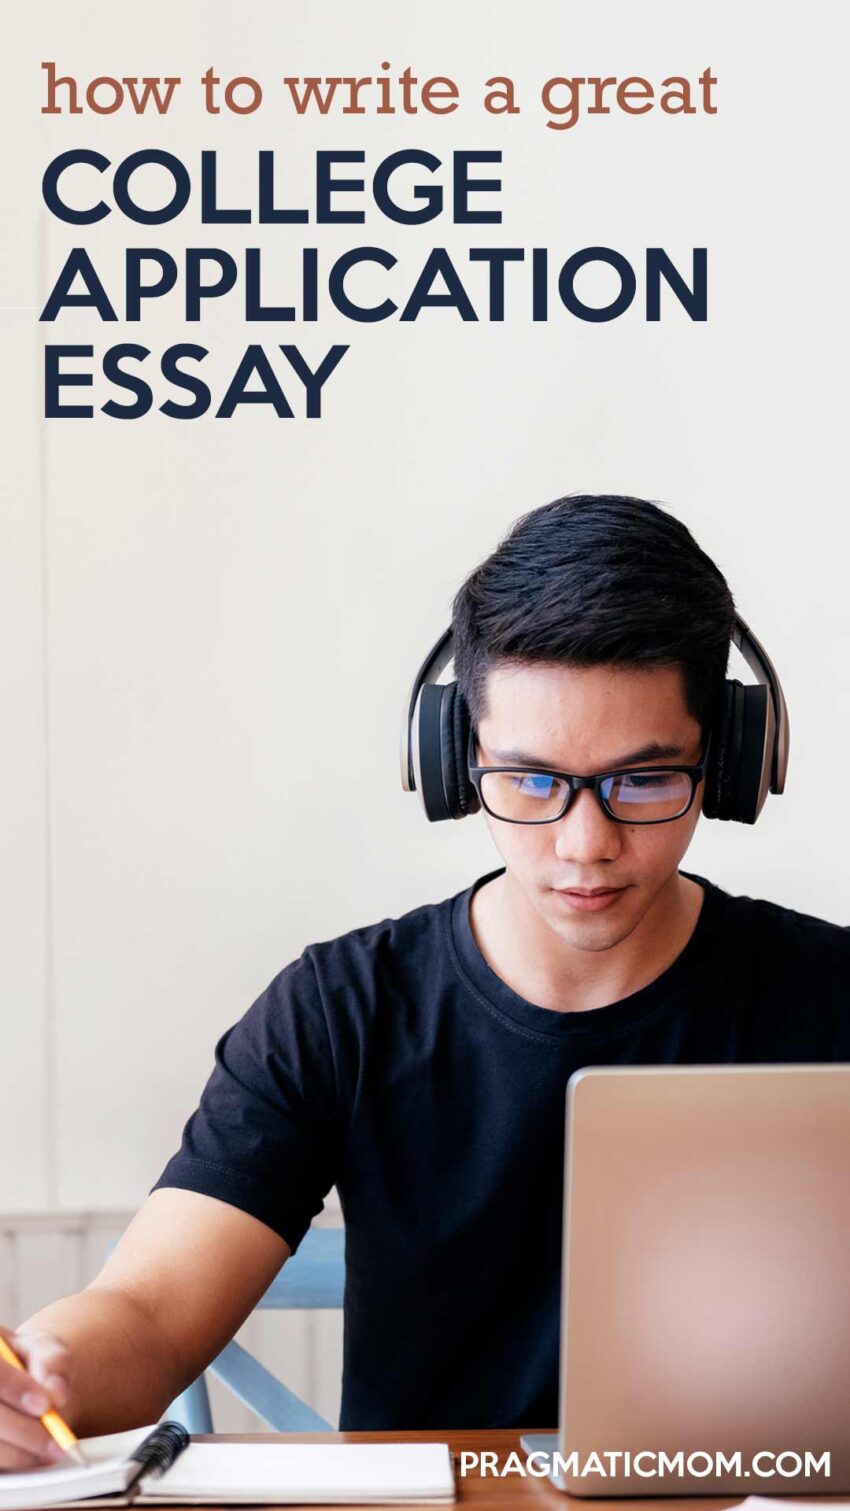 how to write a college application essay step by step